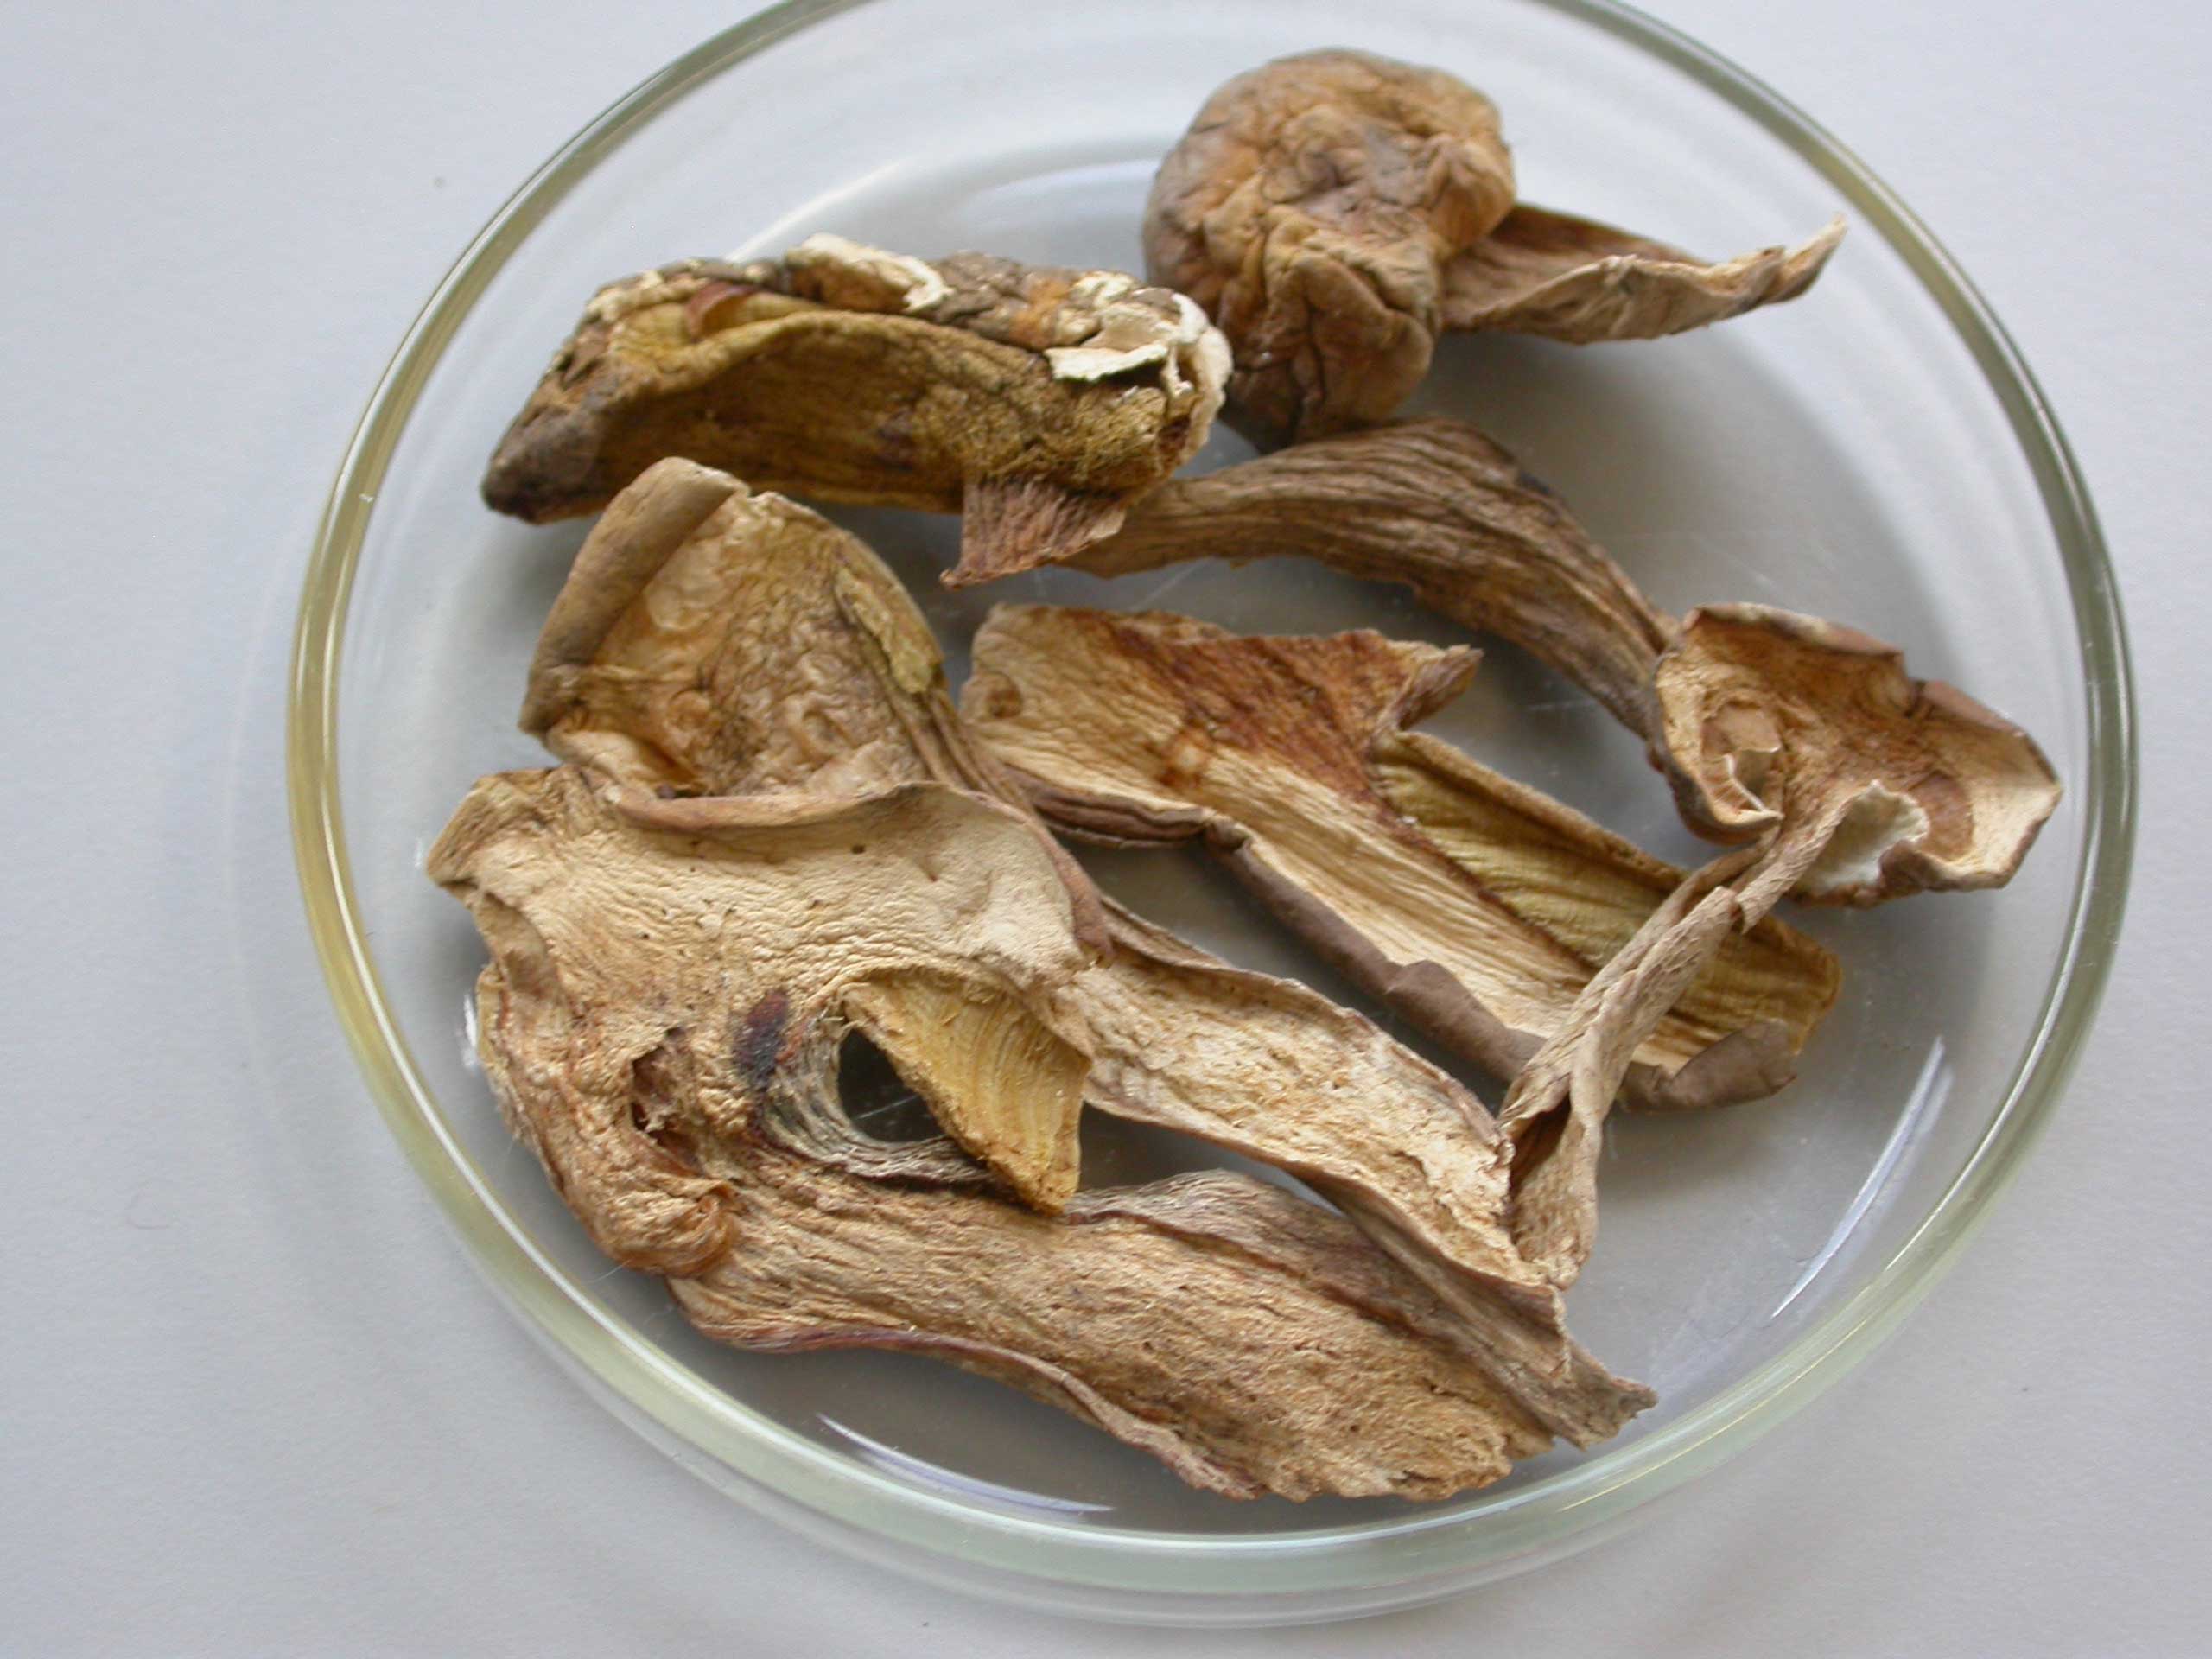 Samples of 3 new mushroom species that were discovered in a grocery store in London.